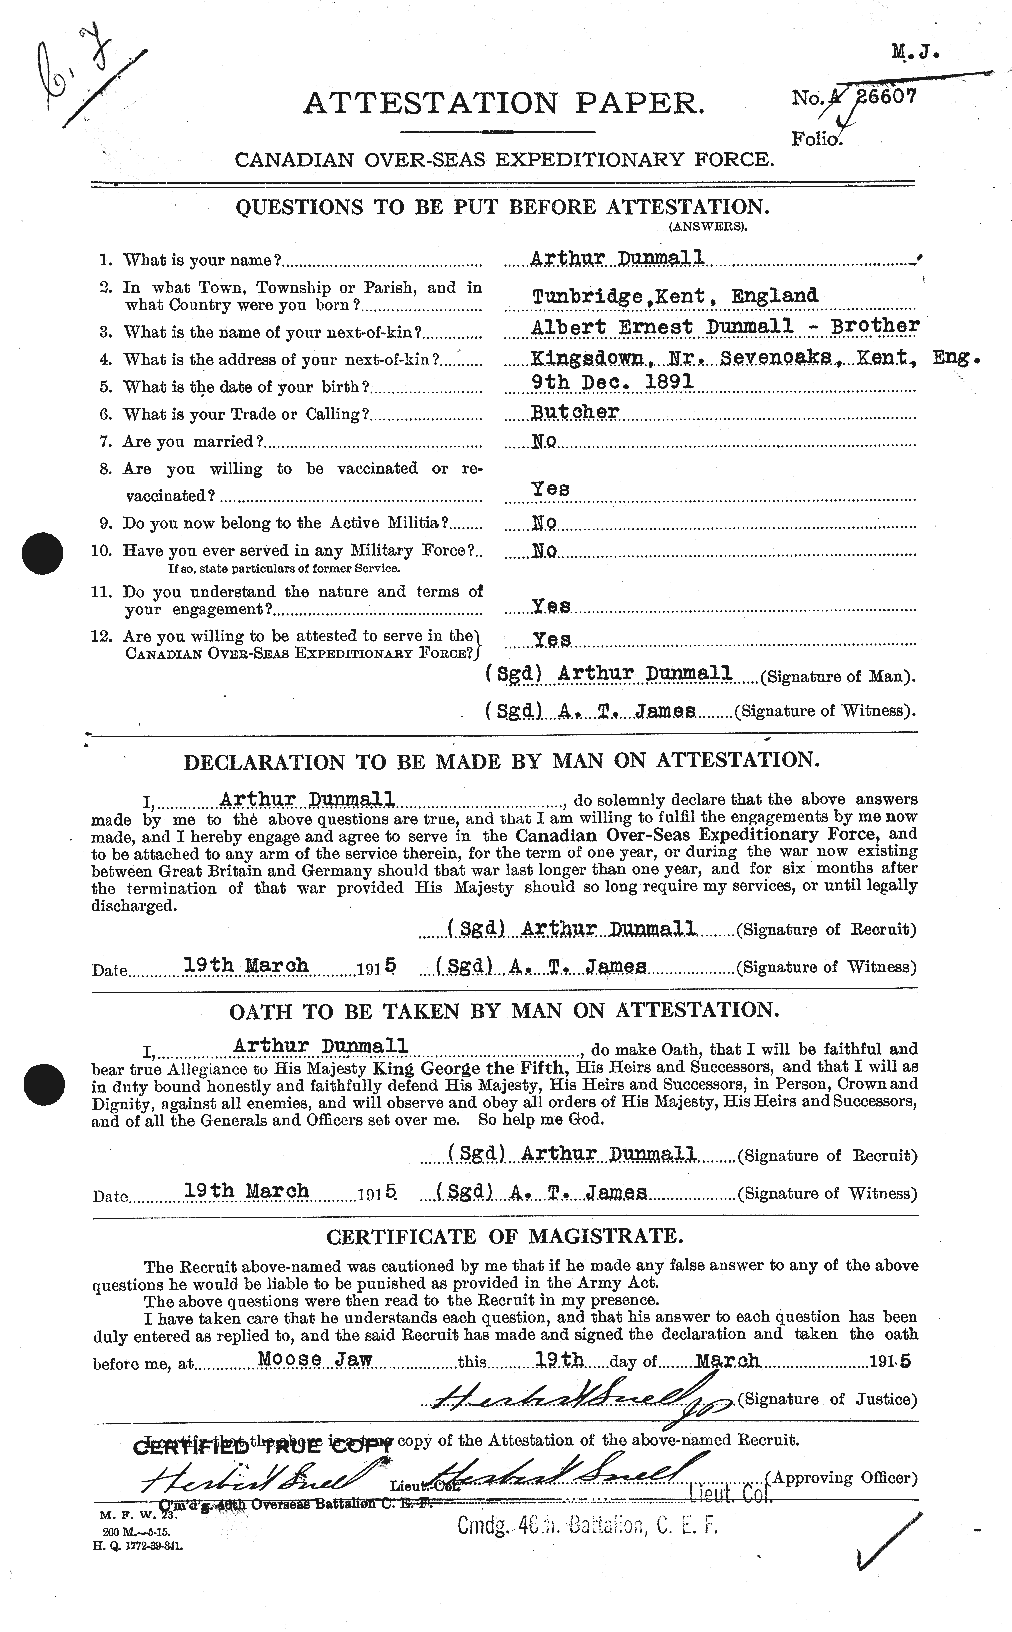 Personnel Records of the First World War - CEF 303913a